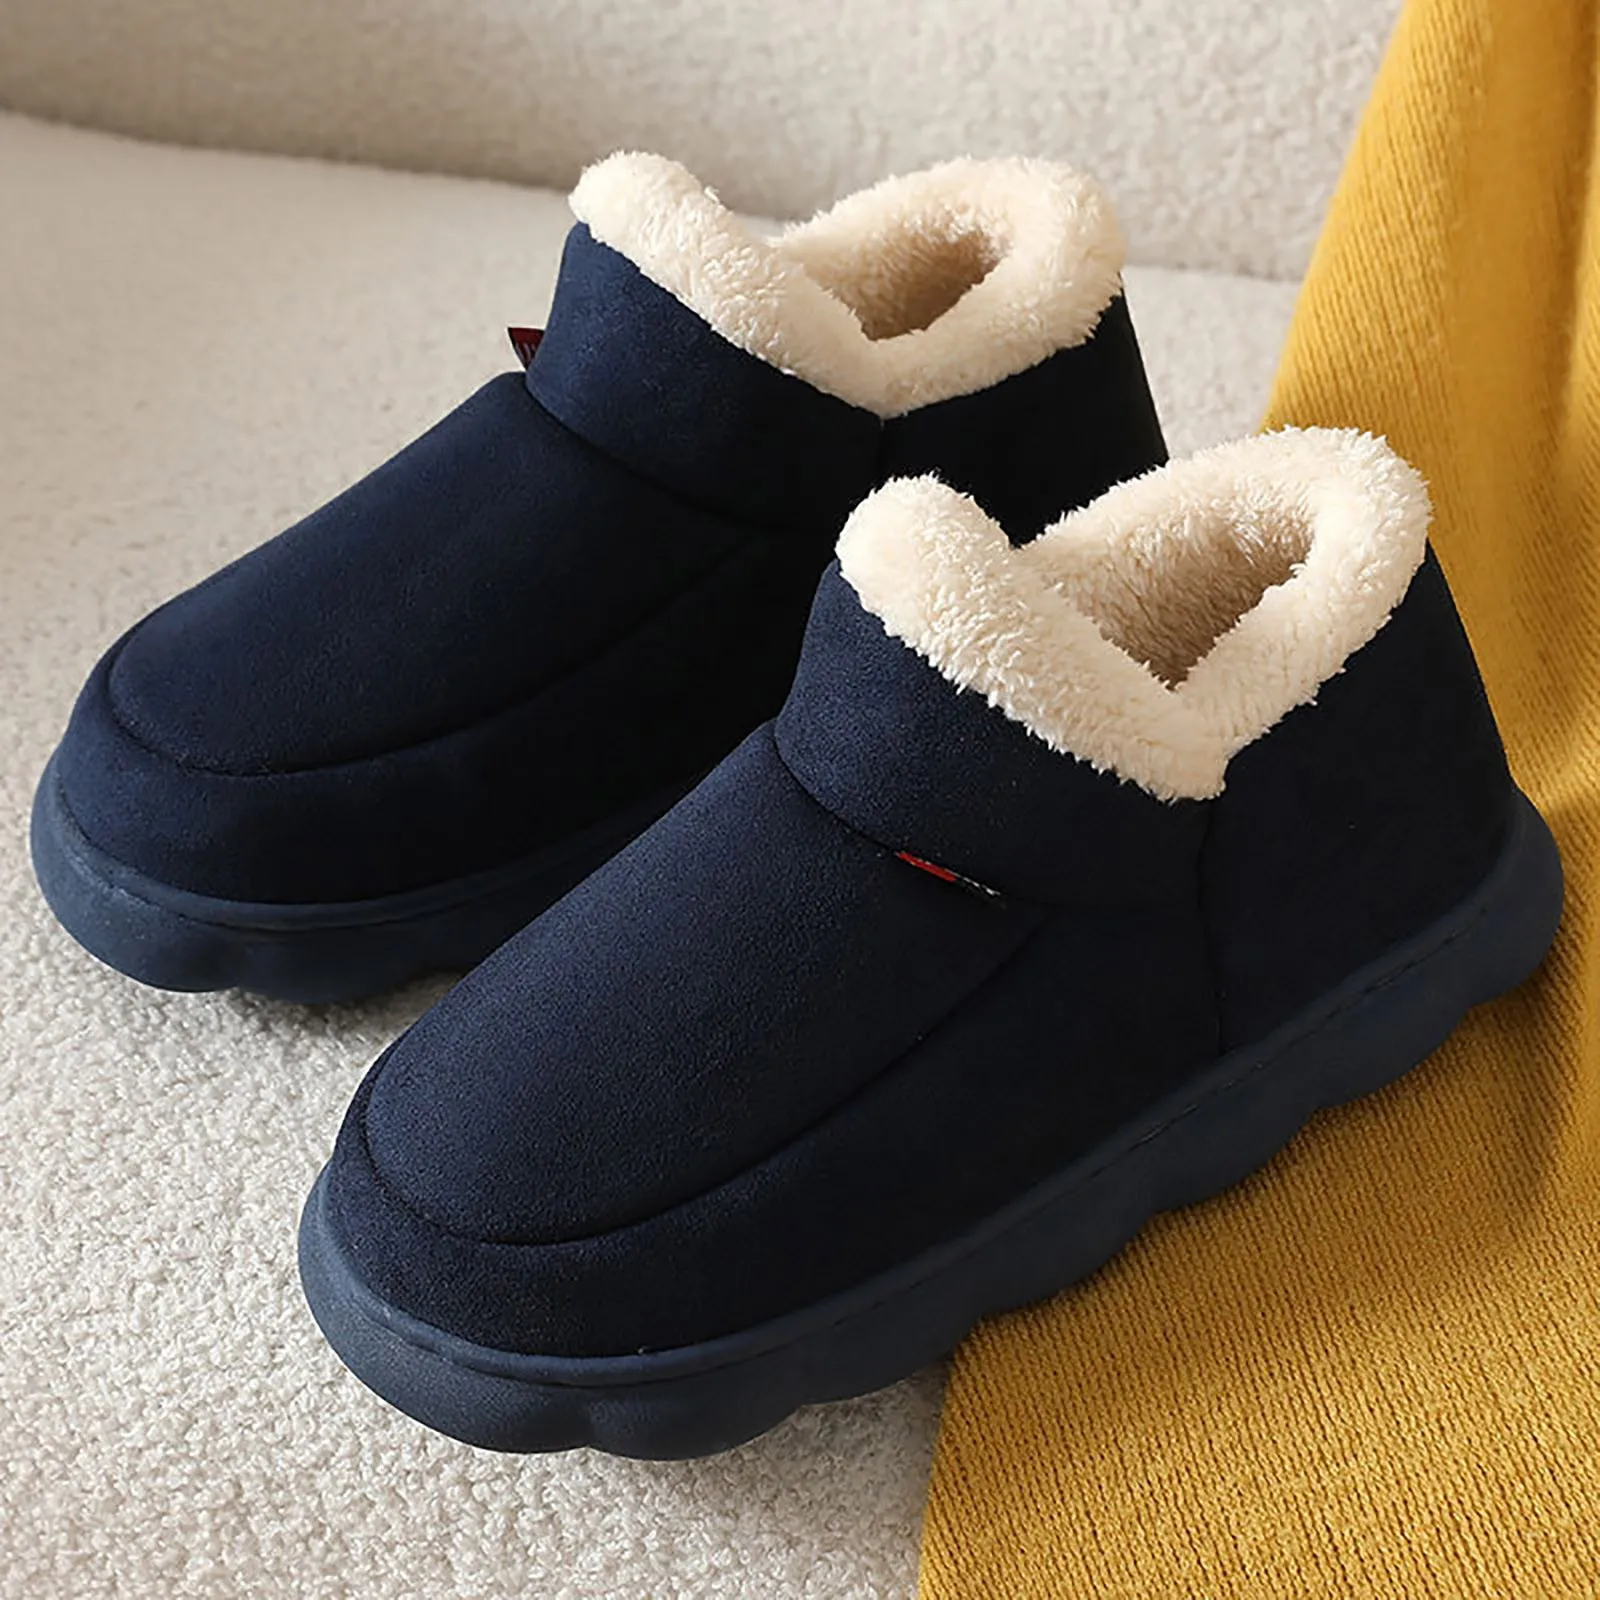 

Winter New Fur Man Slippers For Ladies Winter Fluffy Plush Home Cotton Slippers Woman Indoor Outdoor Fuzzy Cozy Cotton Shoes